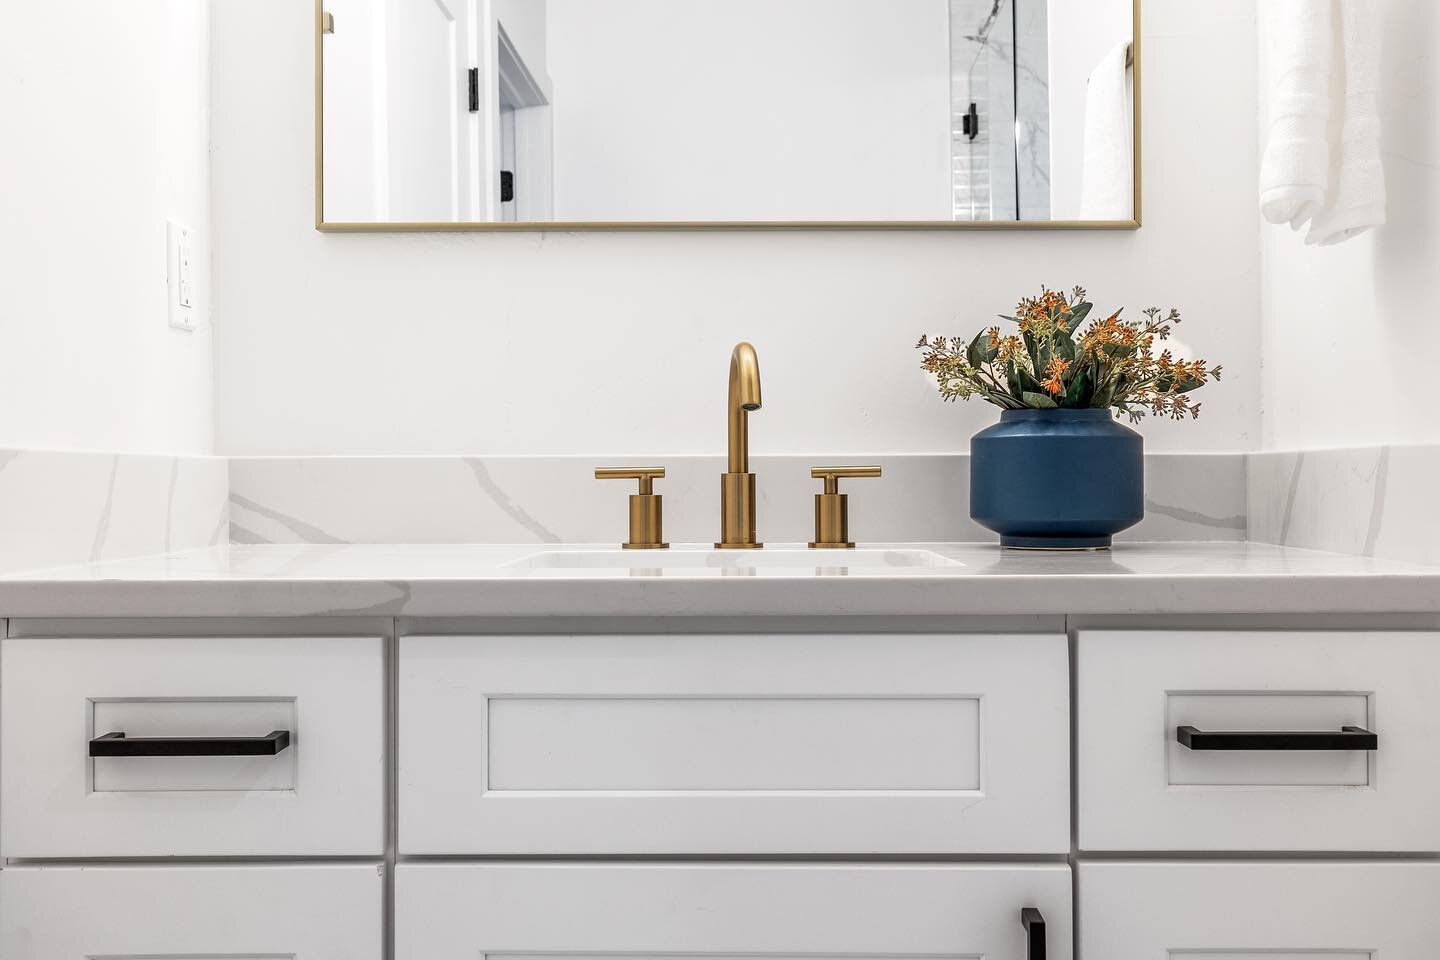 I always like to include a few detail pictures. Especially when a house is staged! 
.
.
.

#utahrealtors #utahrealestate #utahrealtor #utahhomes #utahrealestateagent #utahhomeowner #utahhomeforsale #utahhomesforsale #saltlakerealestate #utahhomeowner